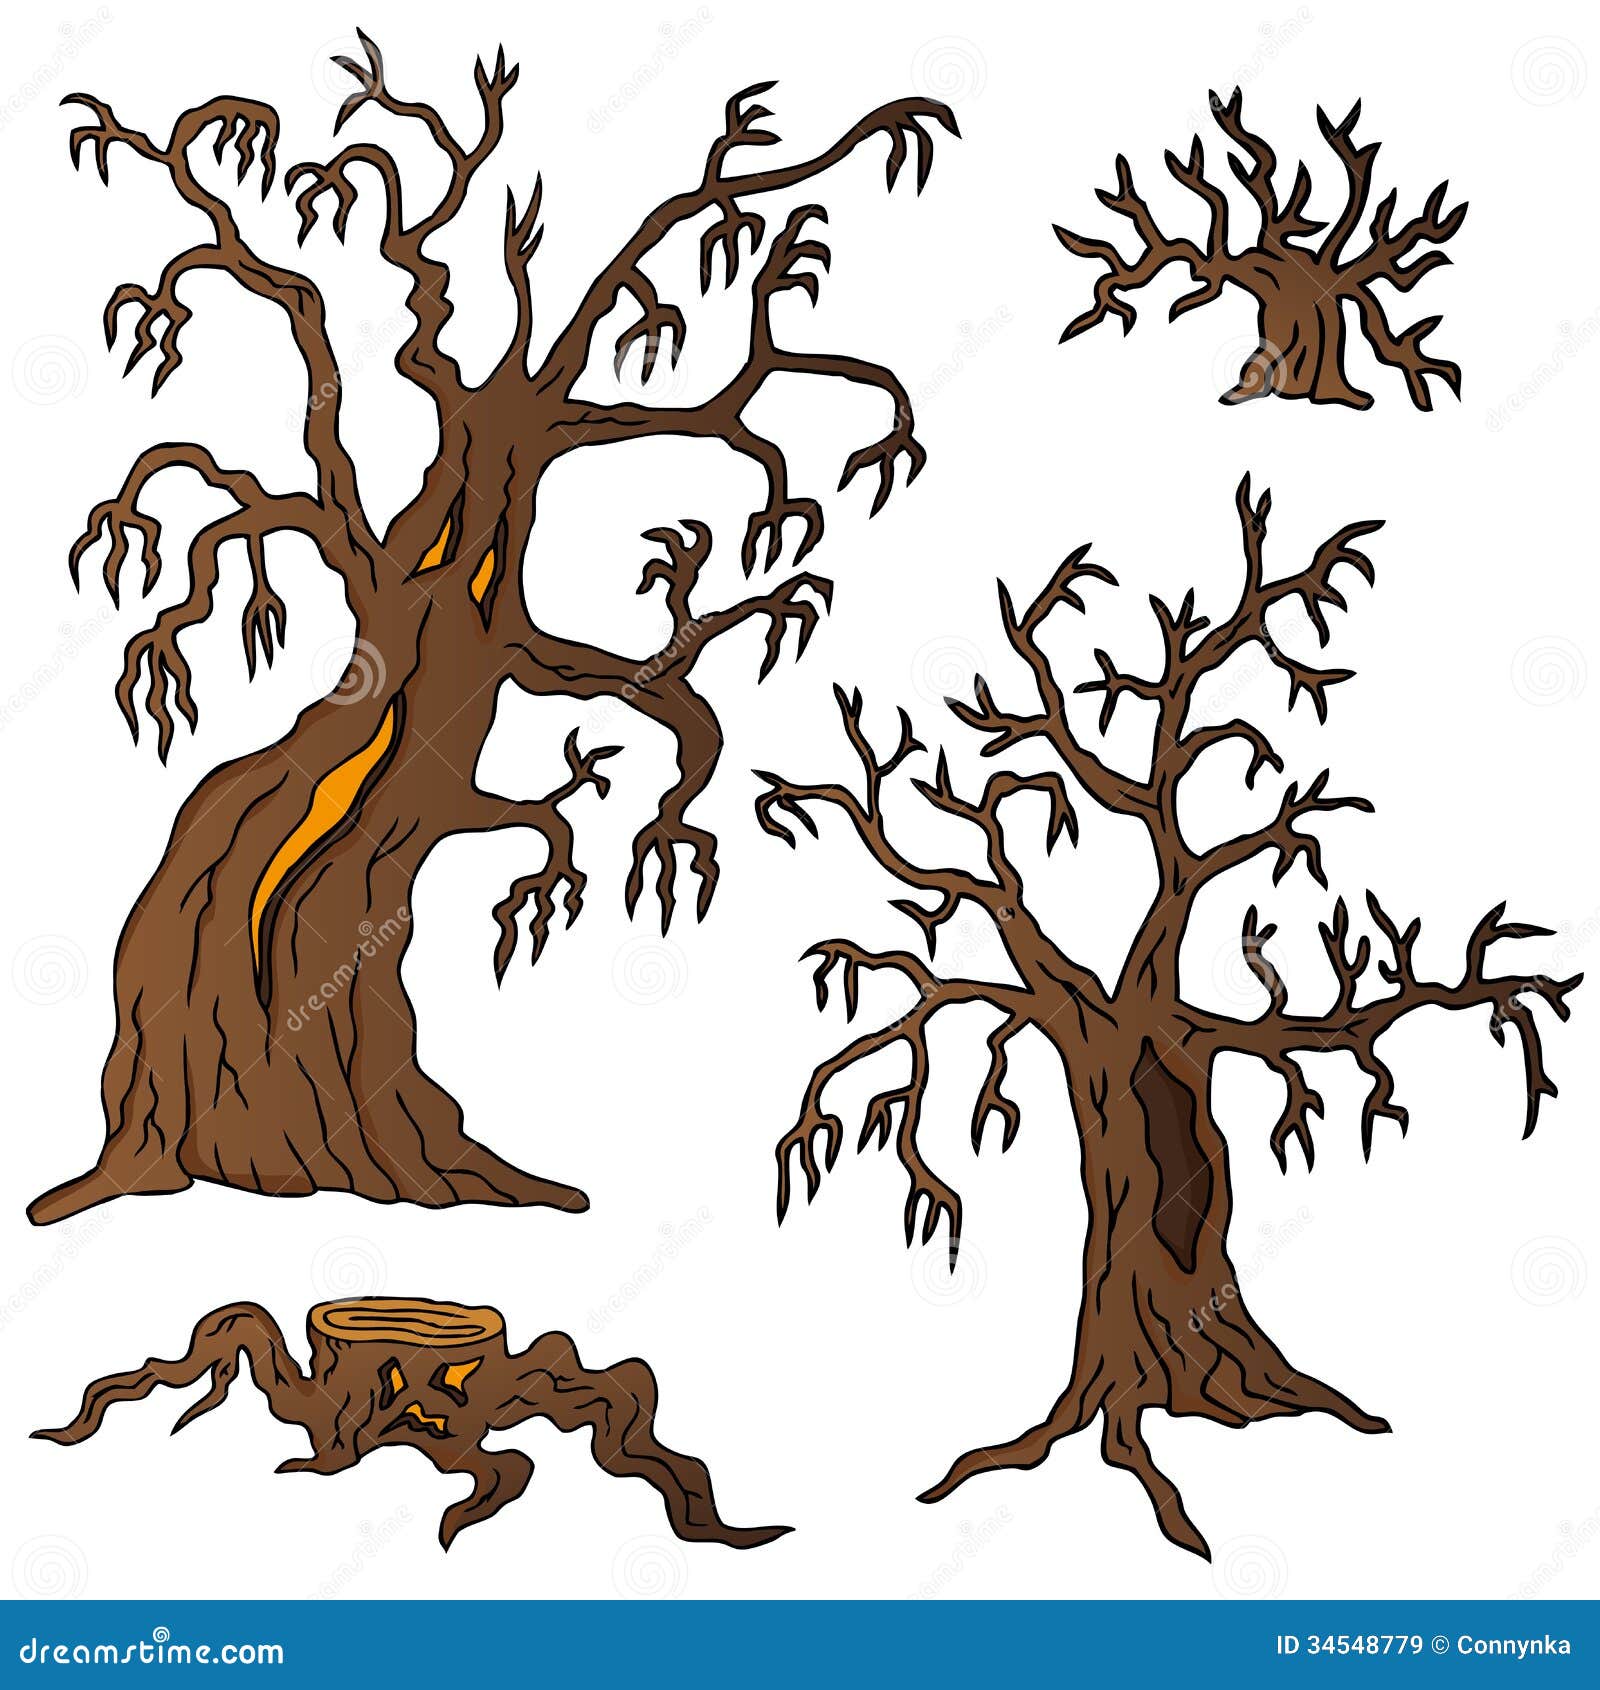 Spooky trees collection stock vector. Illustration of silhouette - 34548779